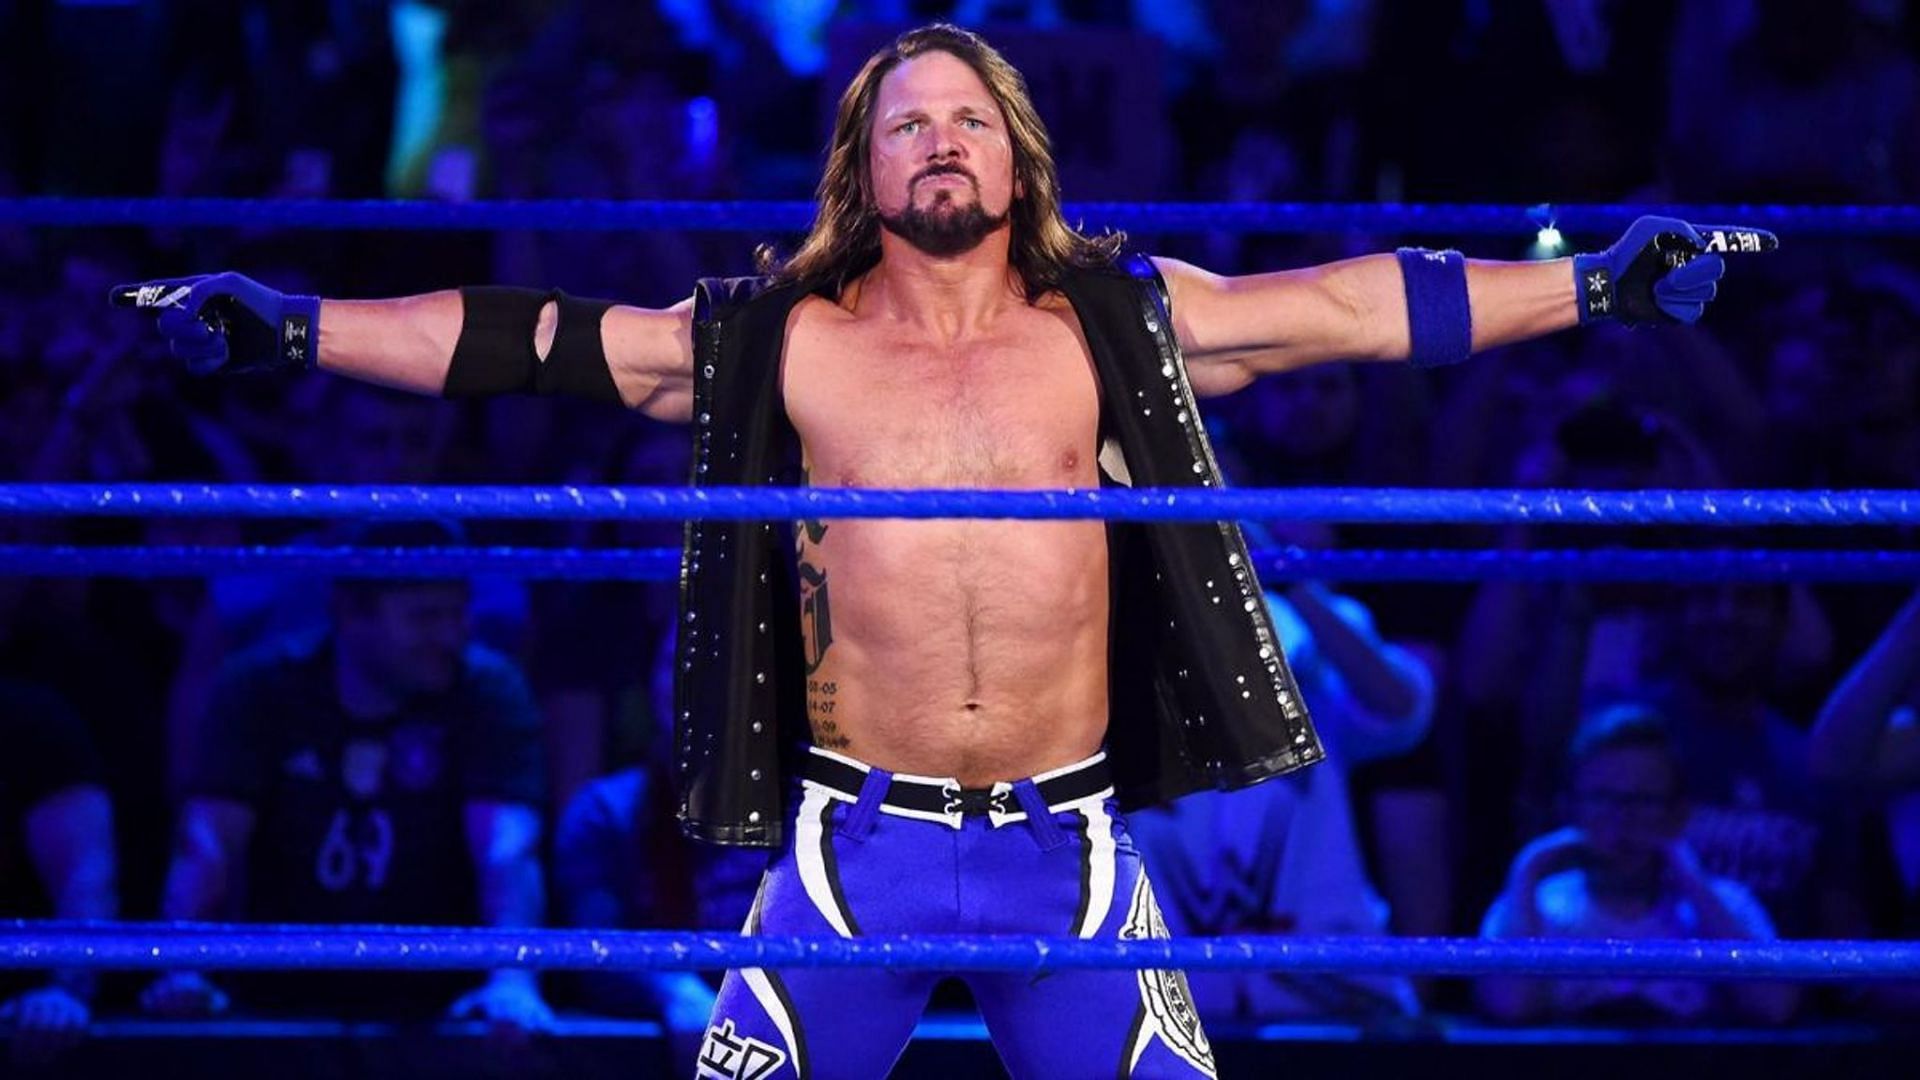 The Phenomenal AJ Styles is ready for a big run!